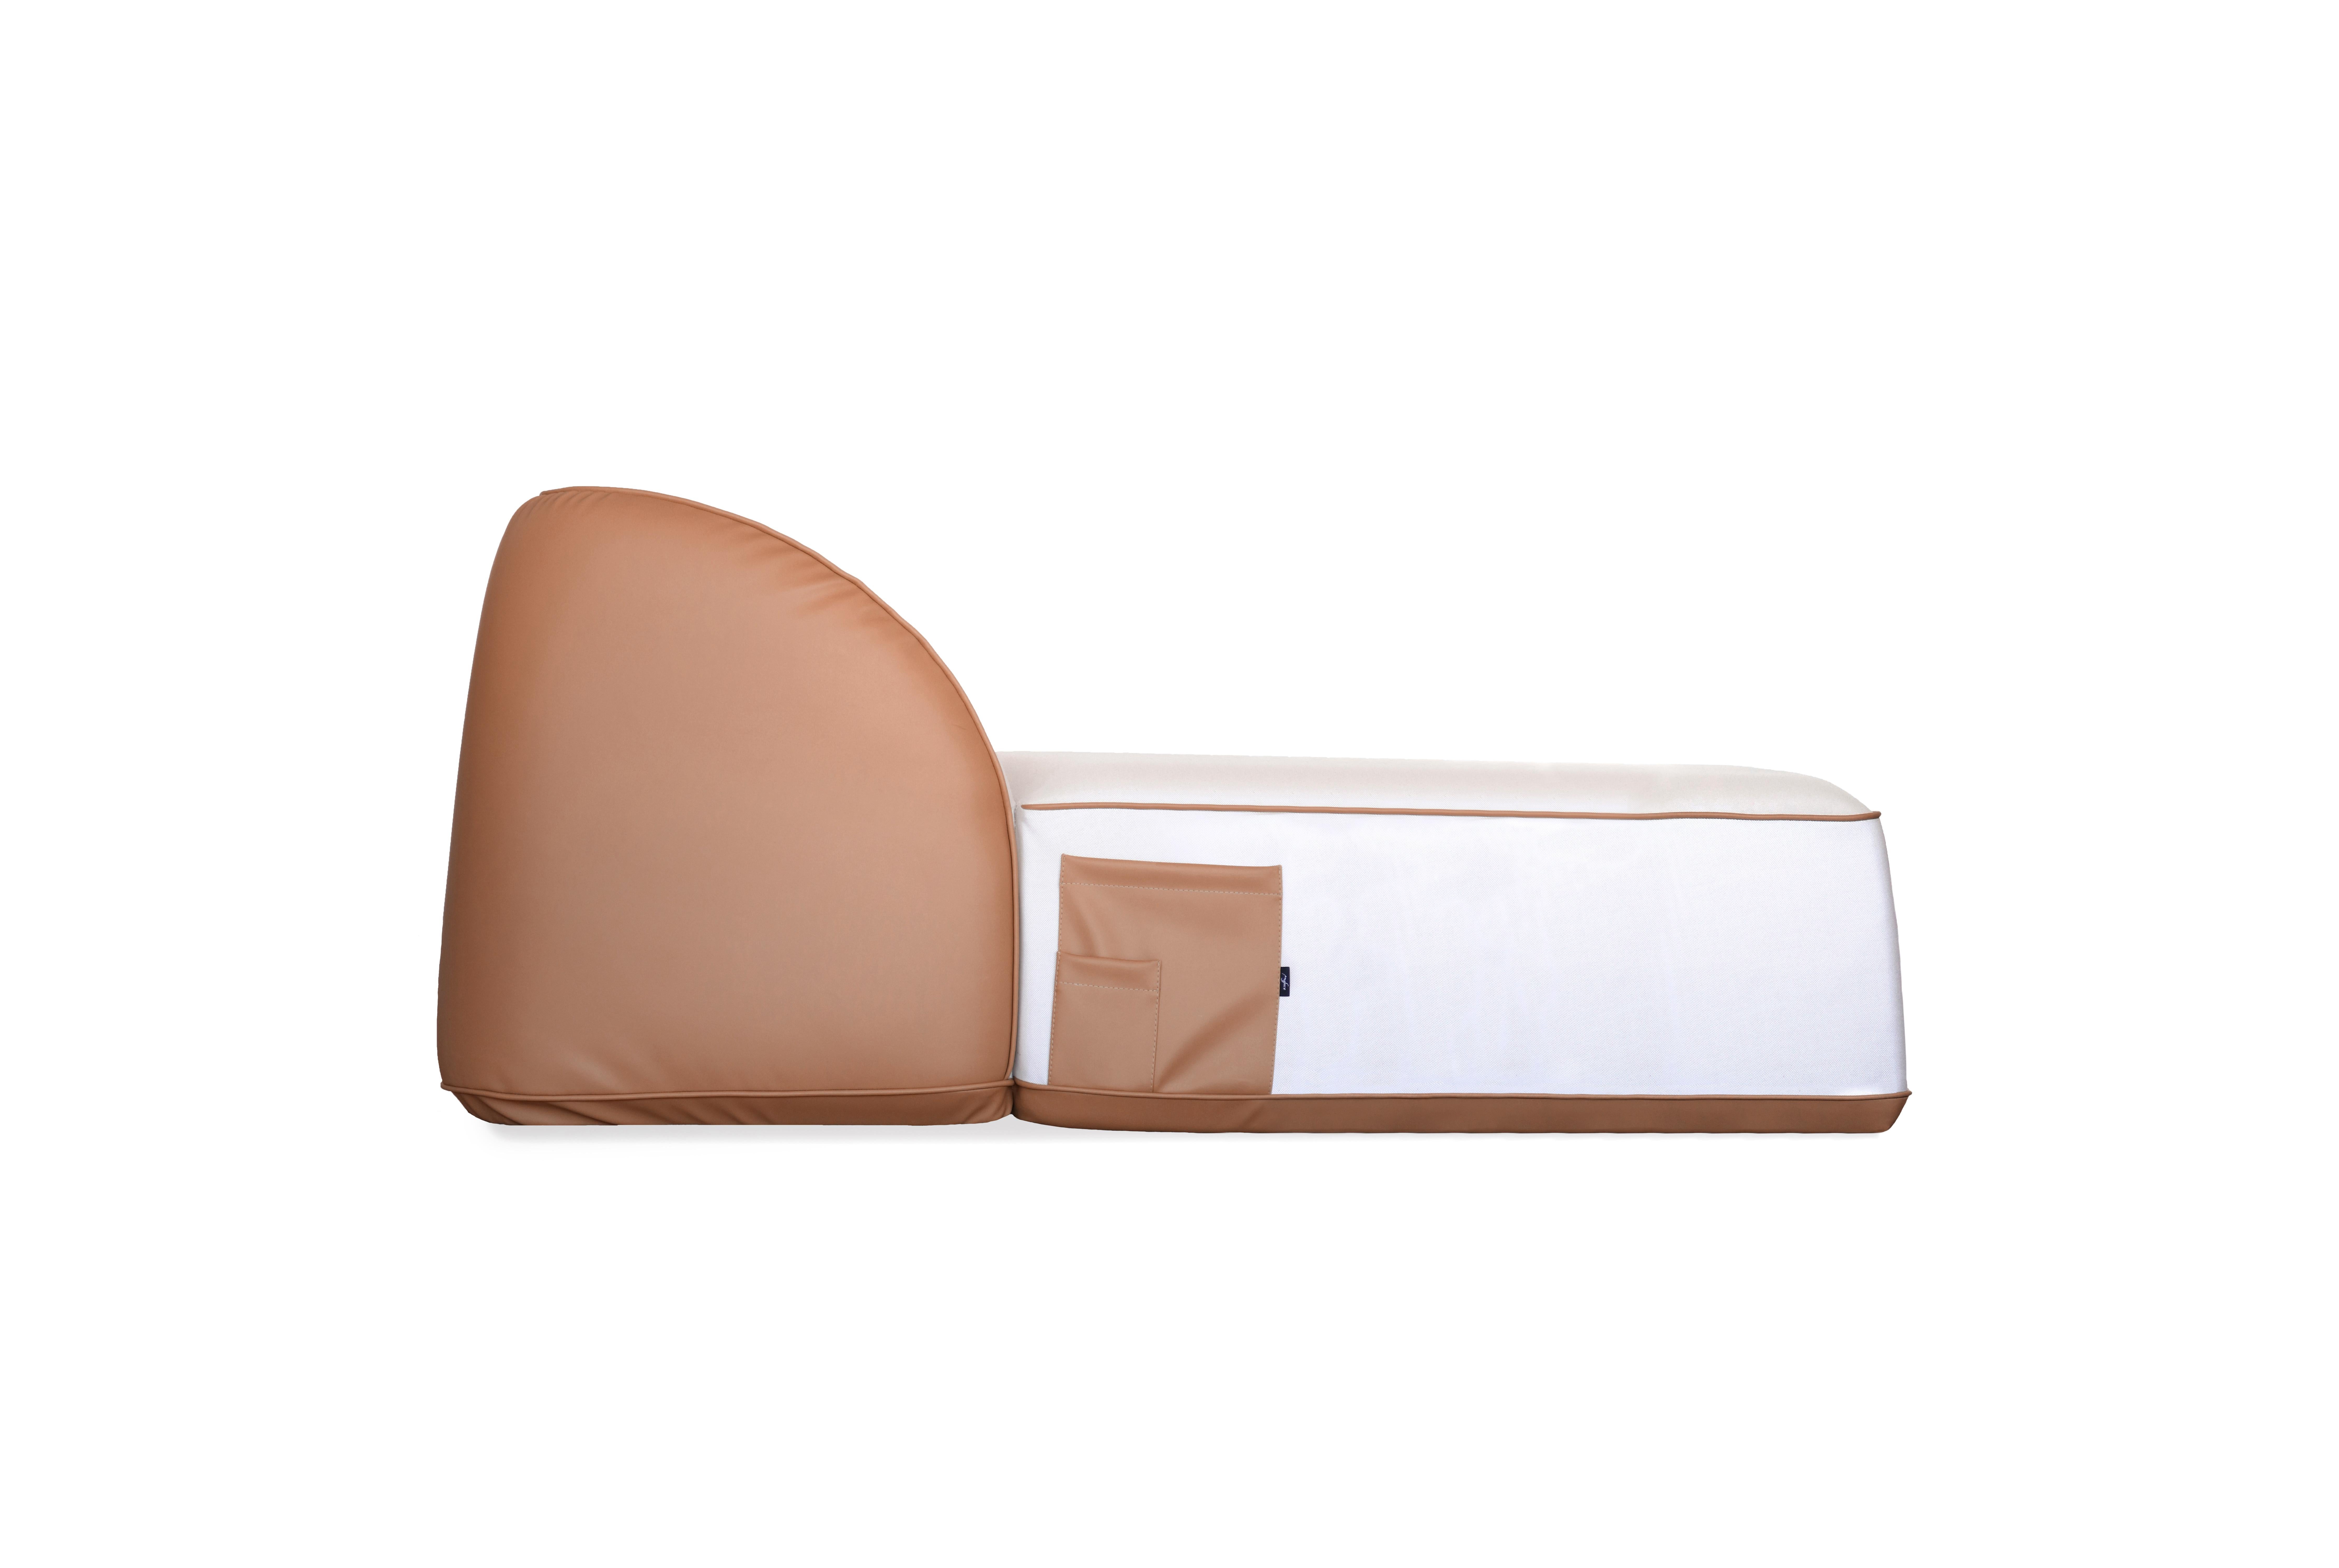 The Flow sunbed features a resistant base that provides stability and support, ensuring that you can fully sink into it. Its soft and cozy design creates a true cloud of comfort that will have you feeling relaxed and rejuvenated in no time.

For